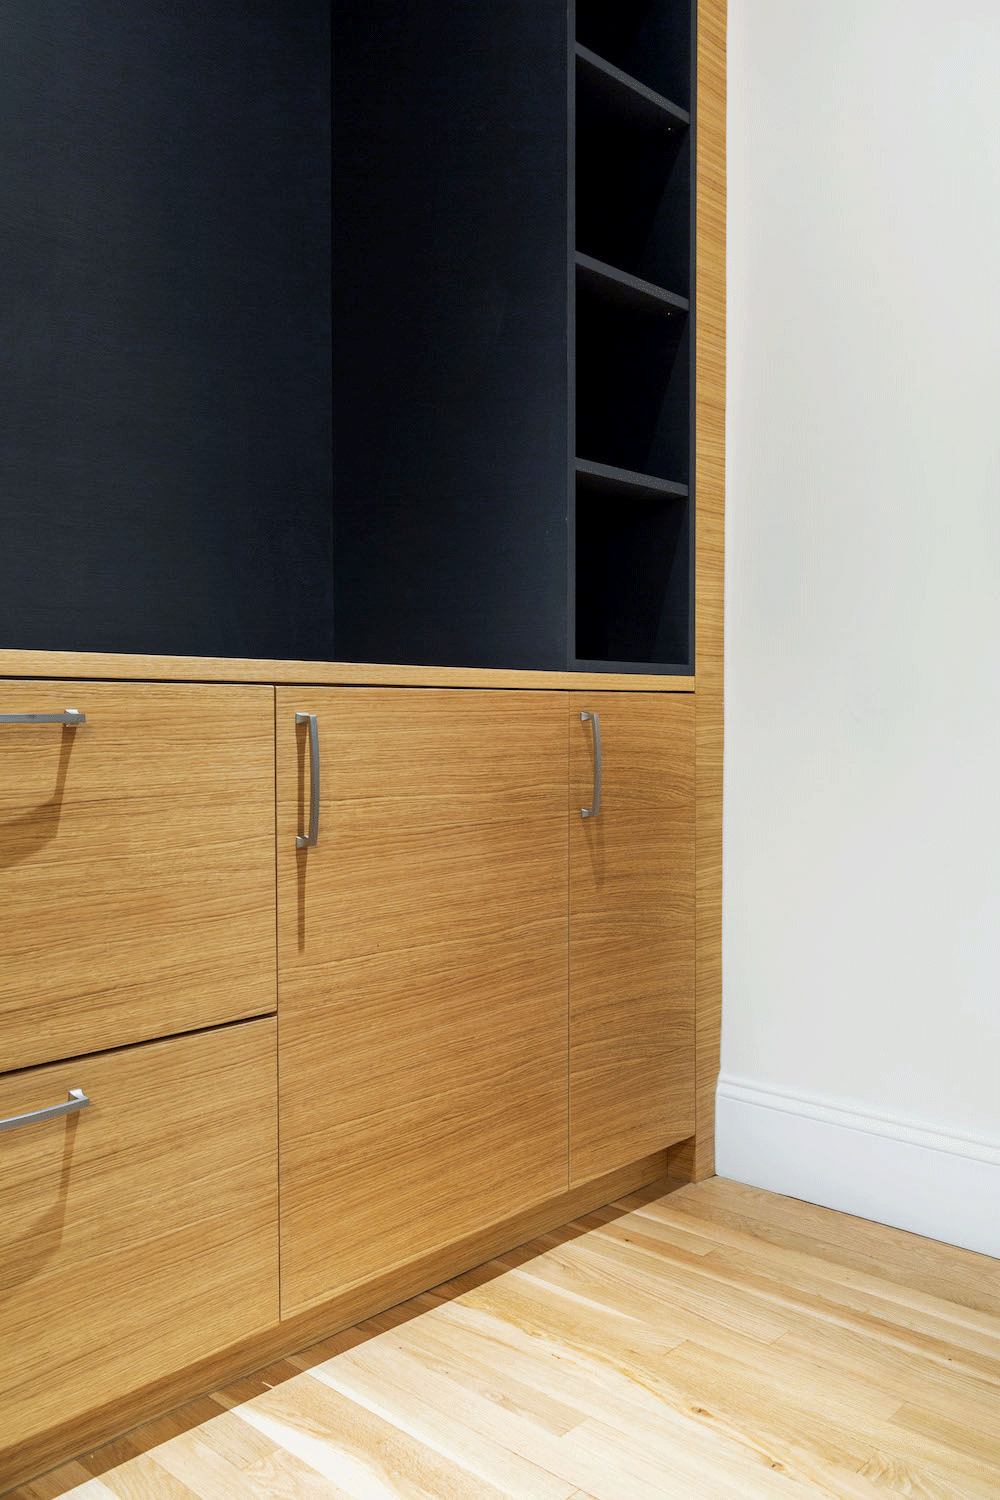 brown wooden custom cabinets with open and closed shelves after renovation